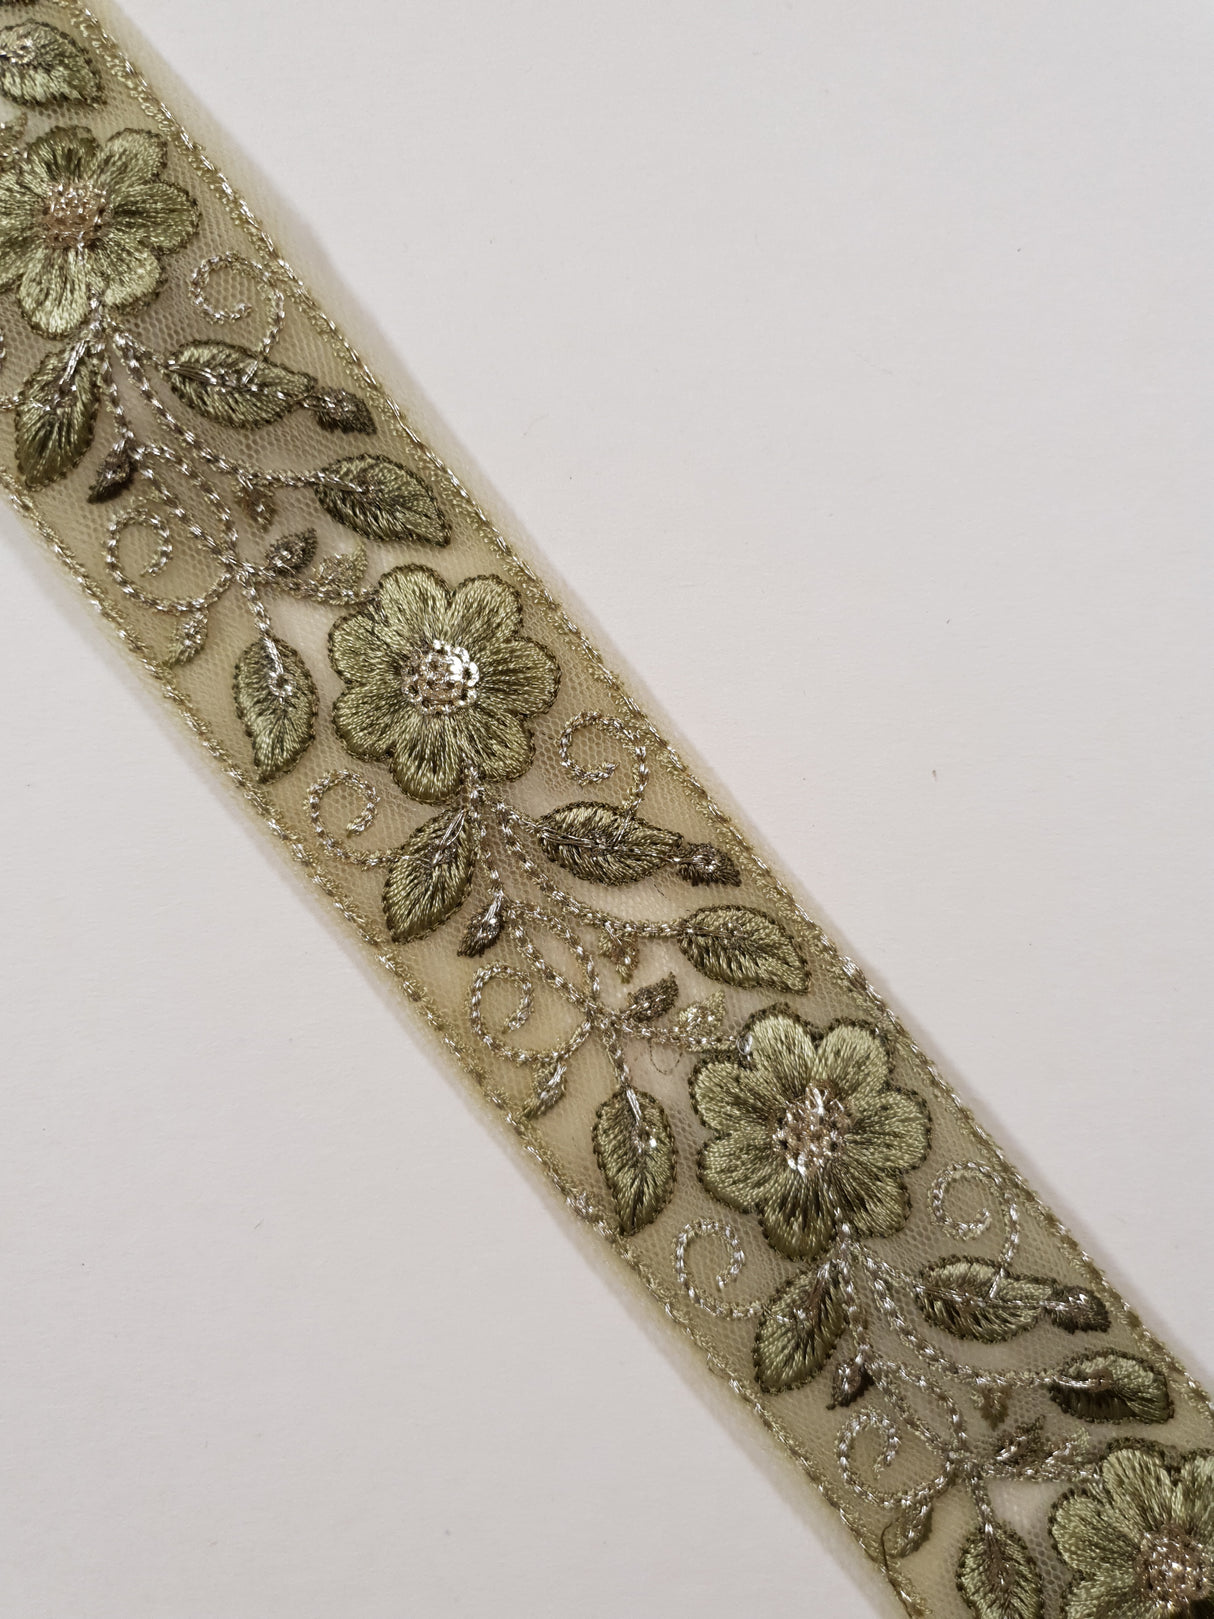 Embroidered Trim - 1 Meter - (ITR-1348)